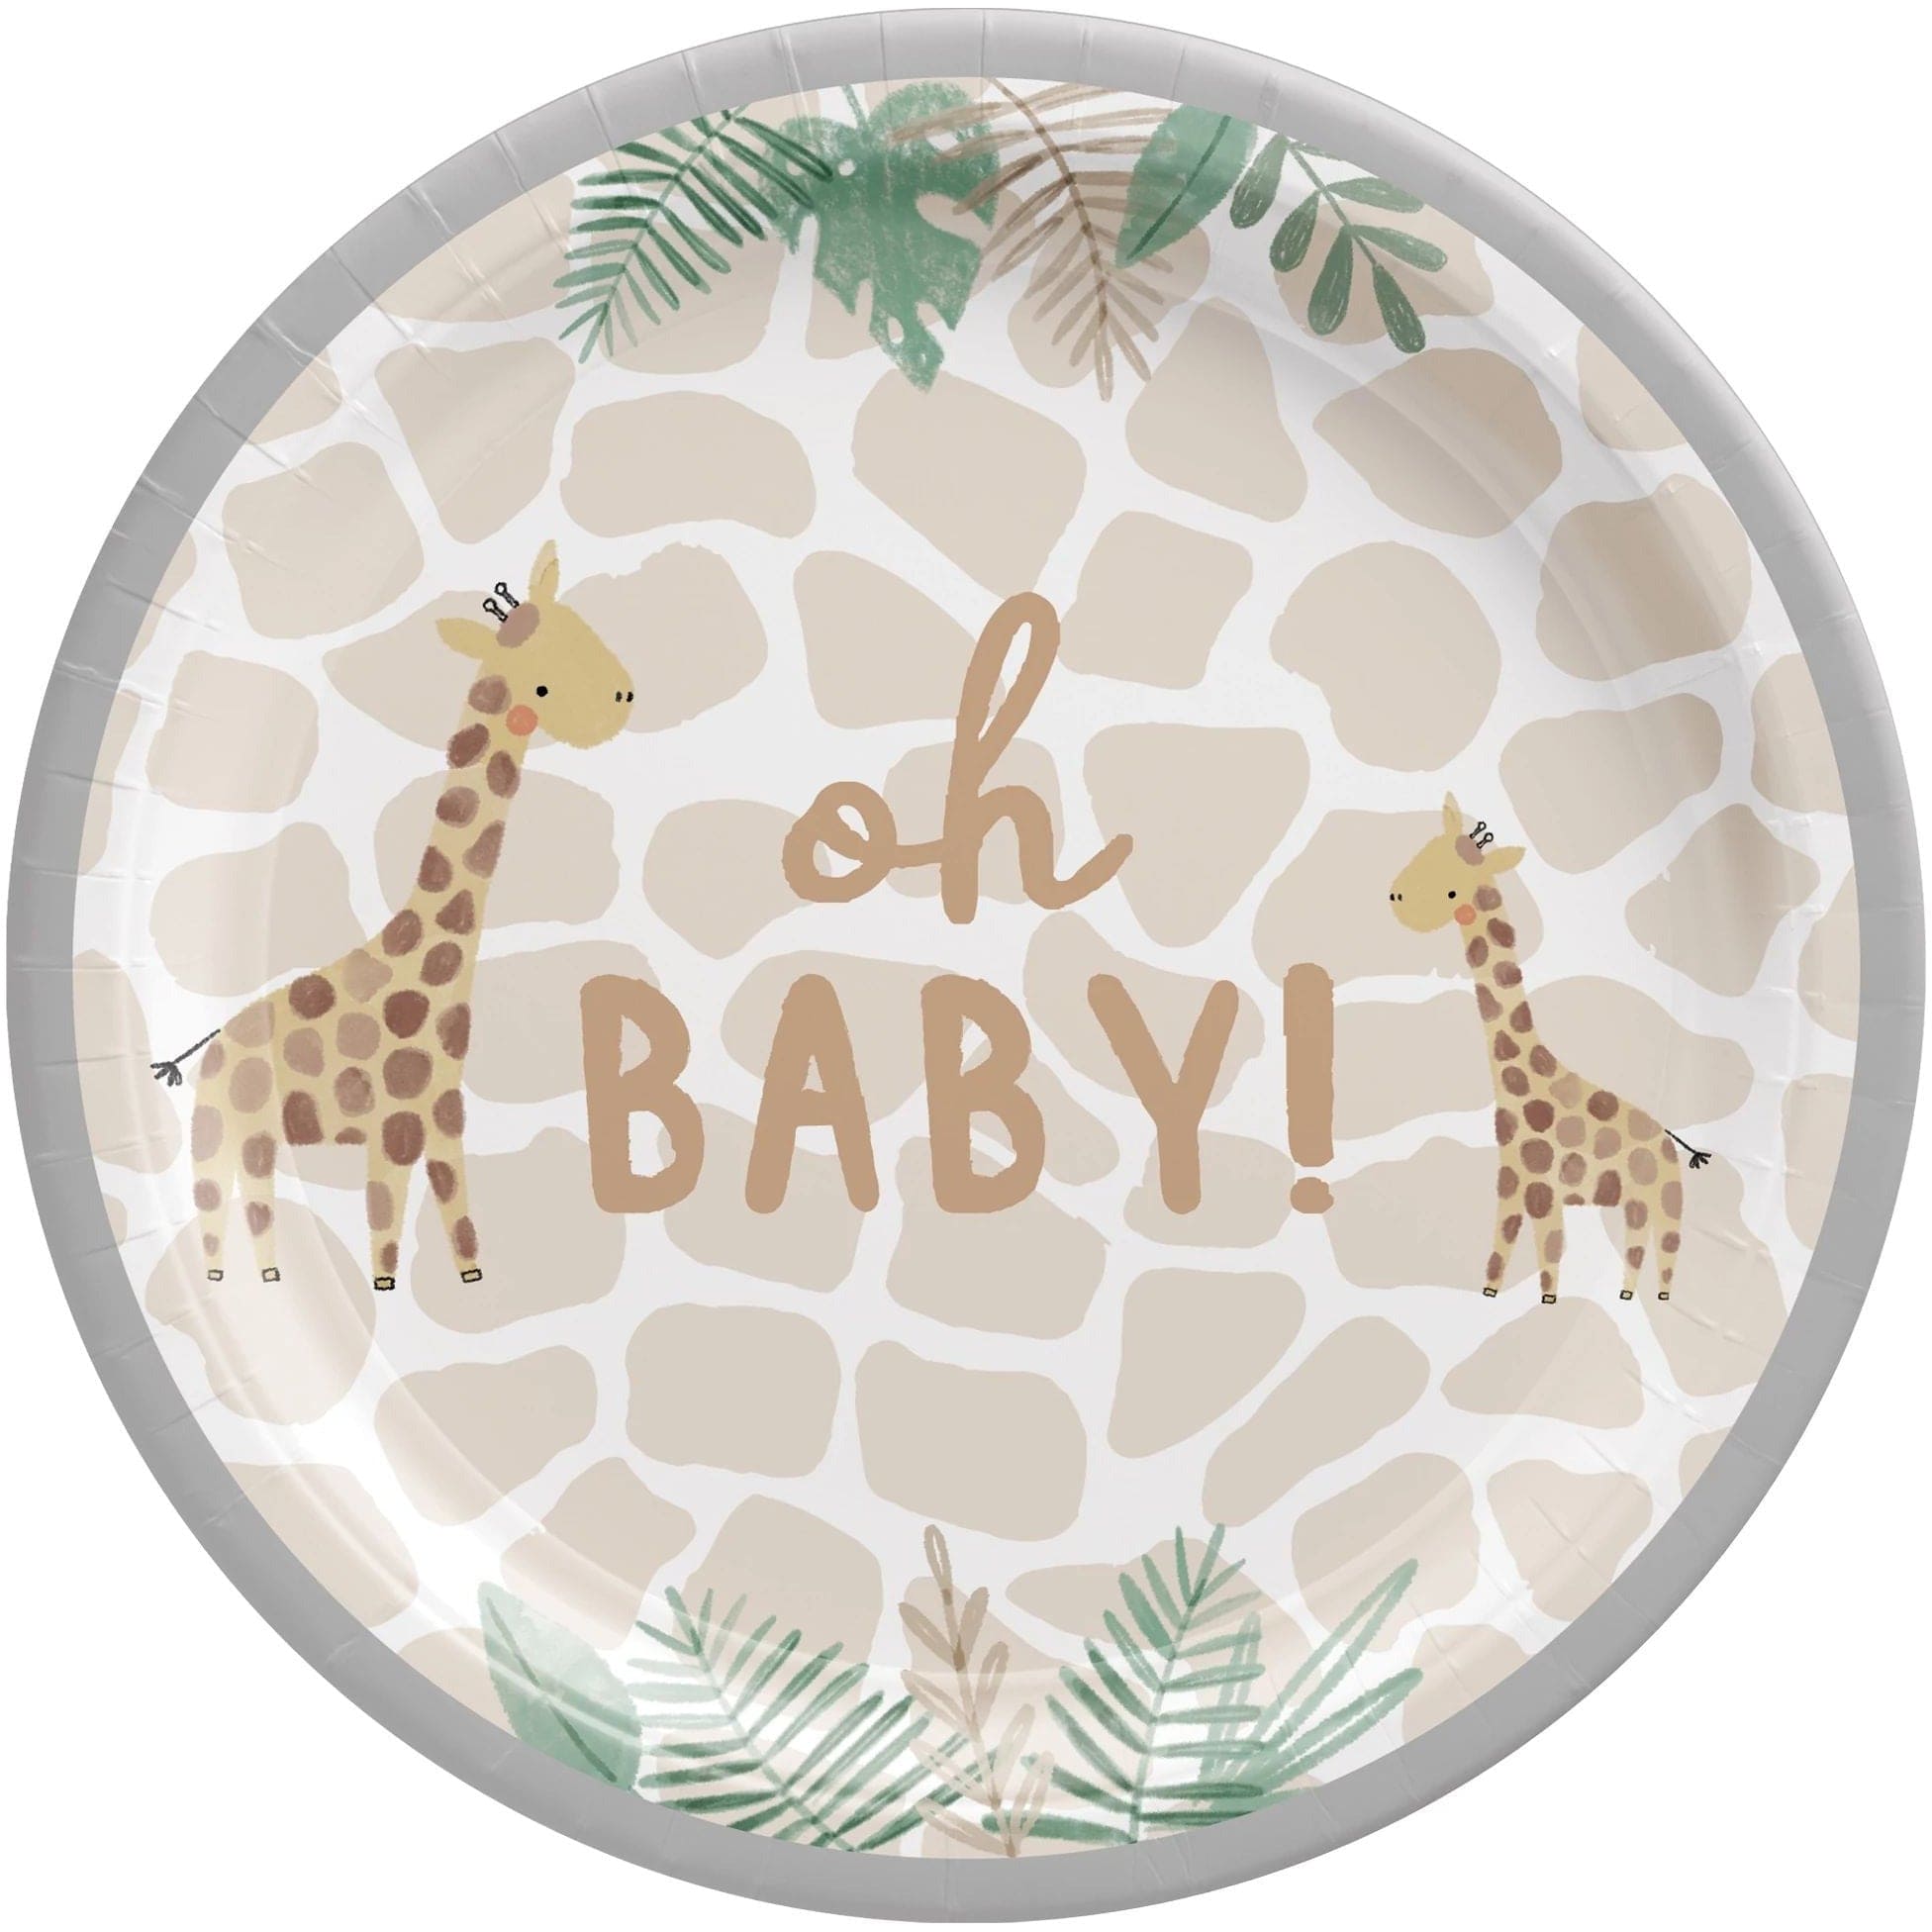 Amscan BABY SHOWER Soft Jungle 7" Round Plates